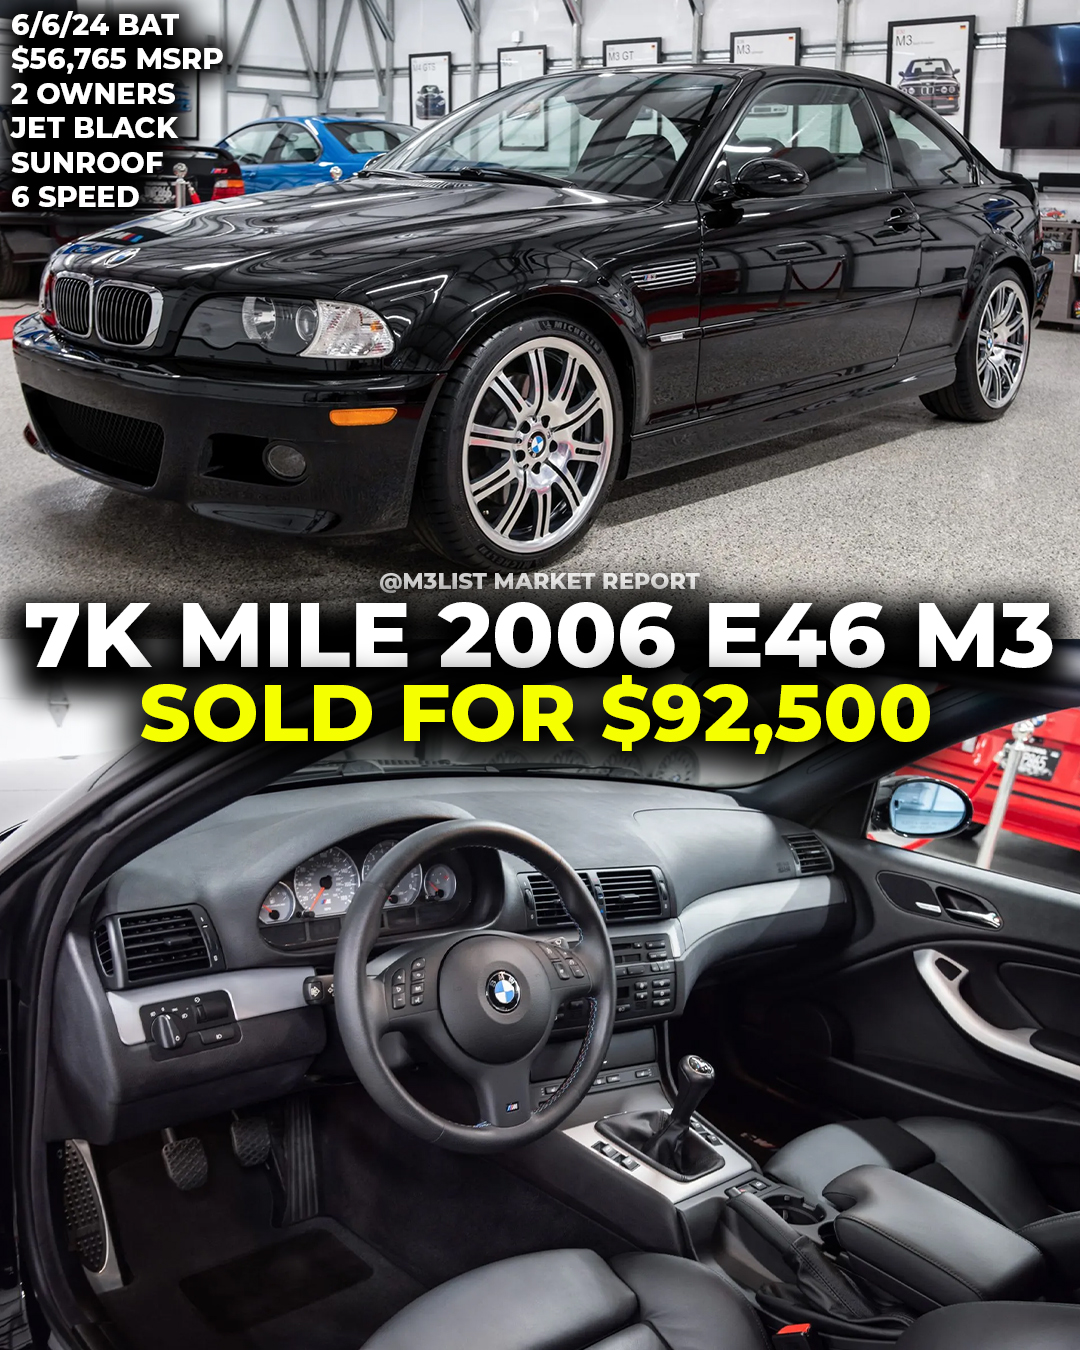 7k mile 2006 BMW E46 M3 sells for $92,500 on Bring A Trailer! 6 speed 2 owner.